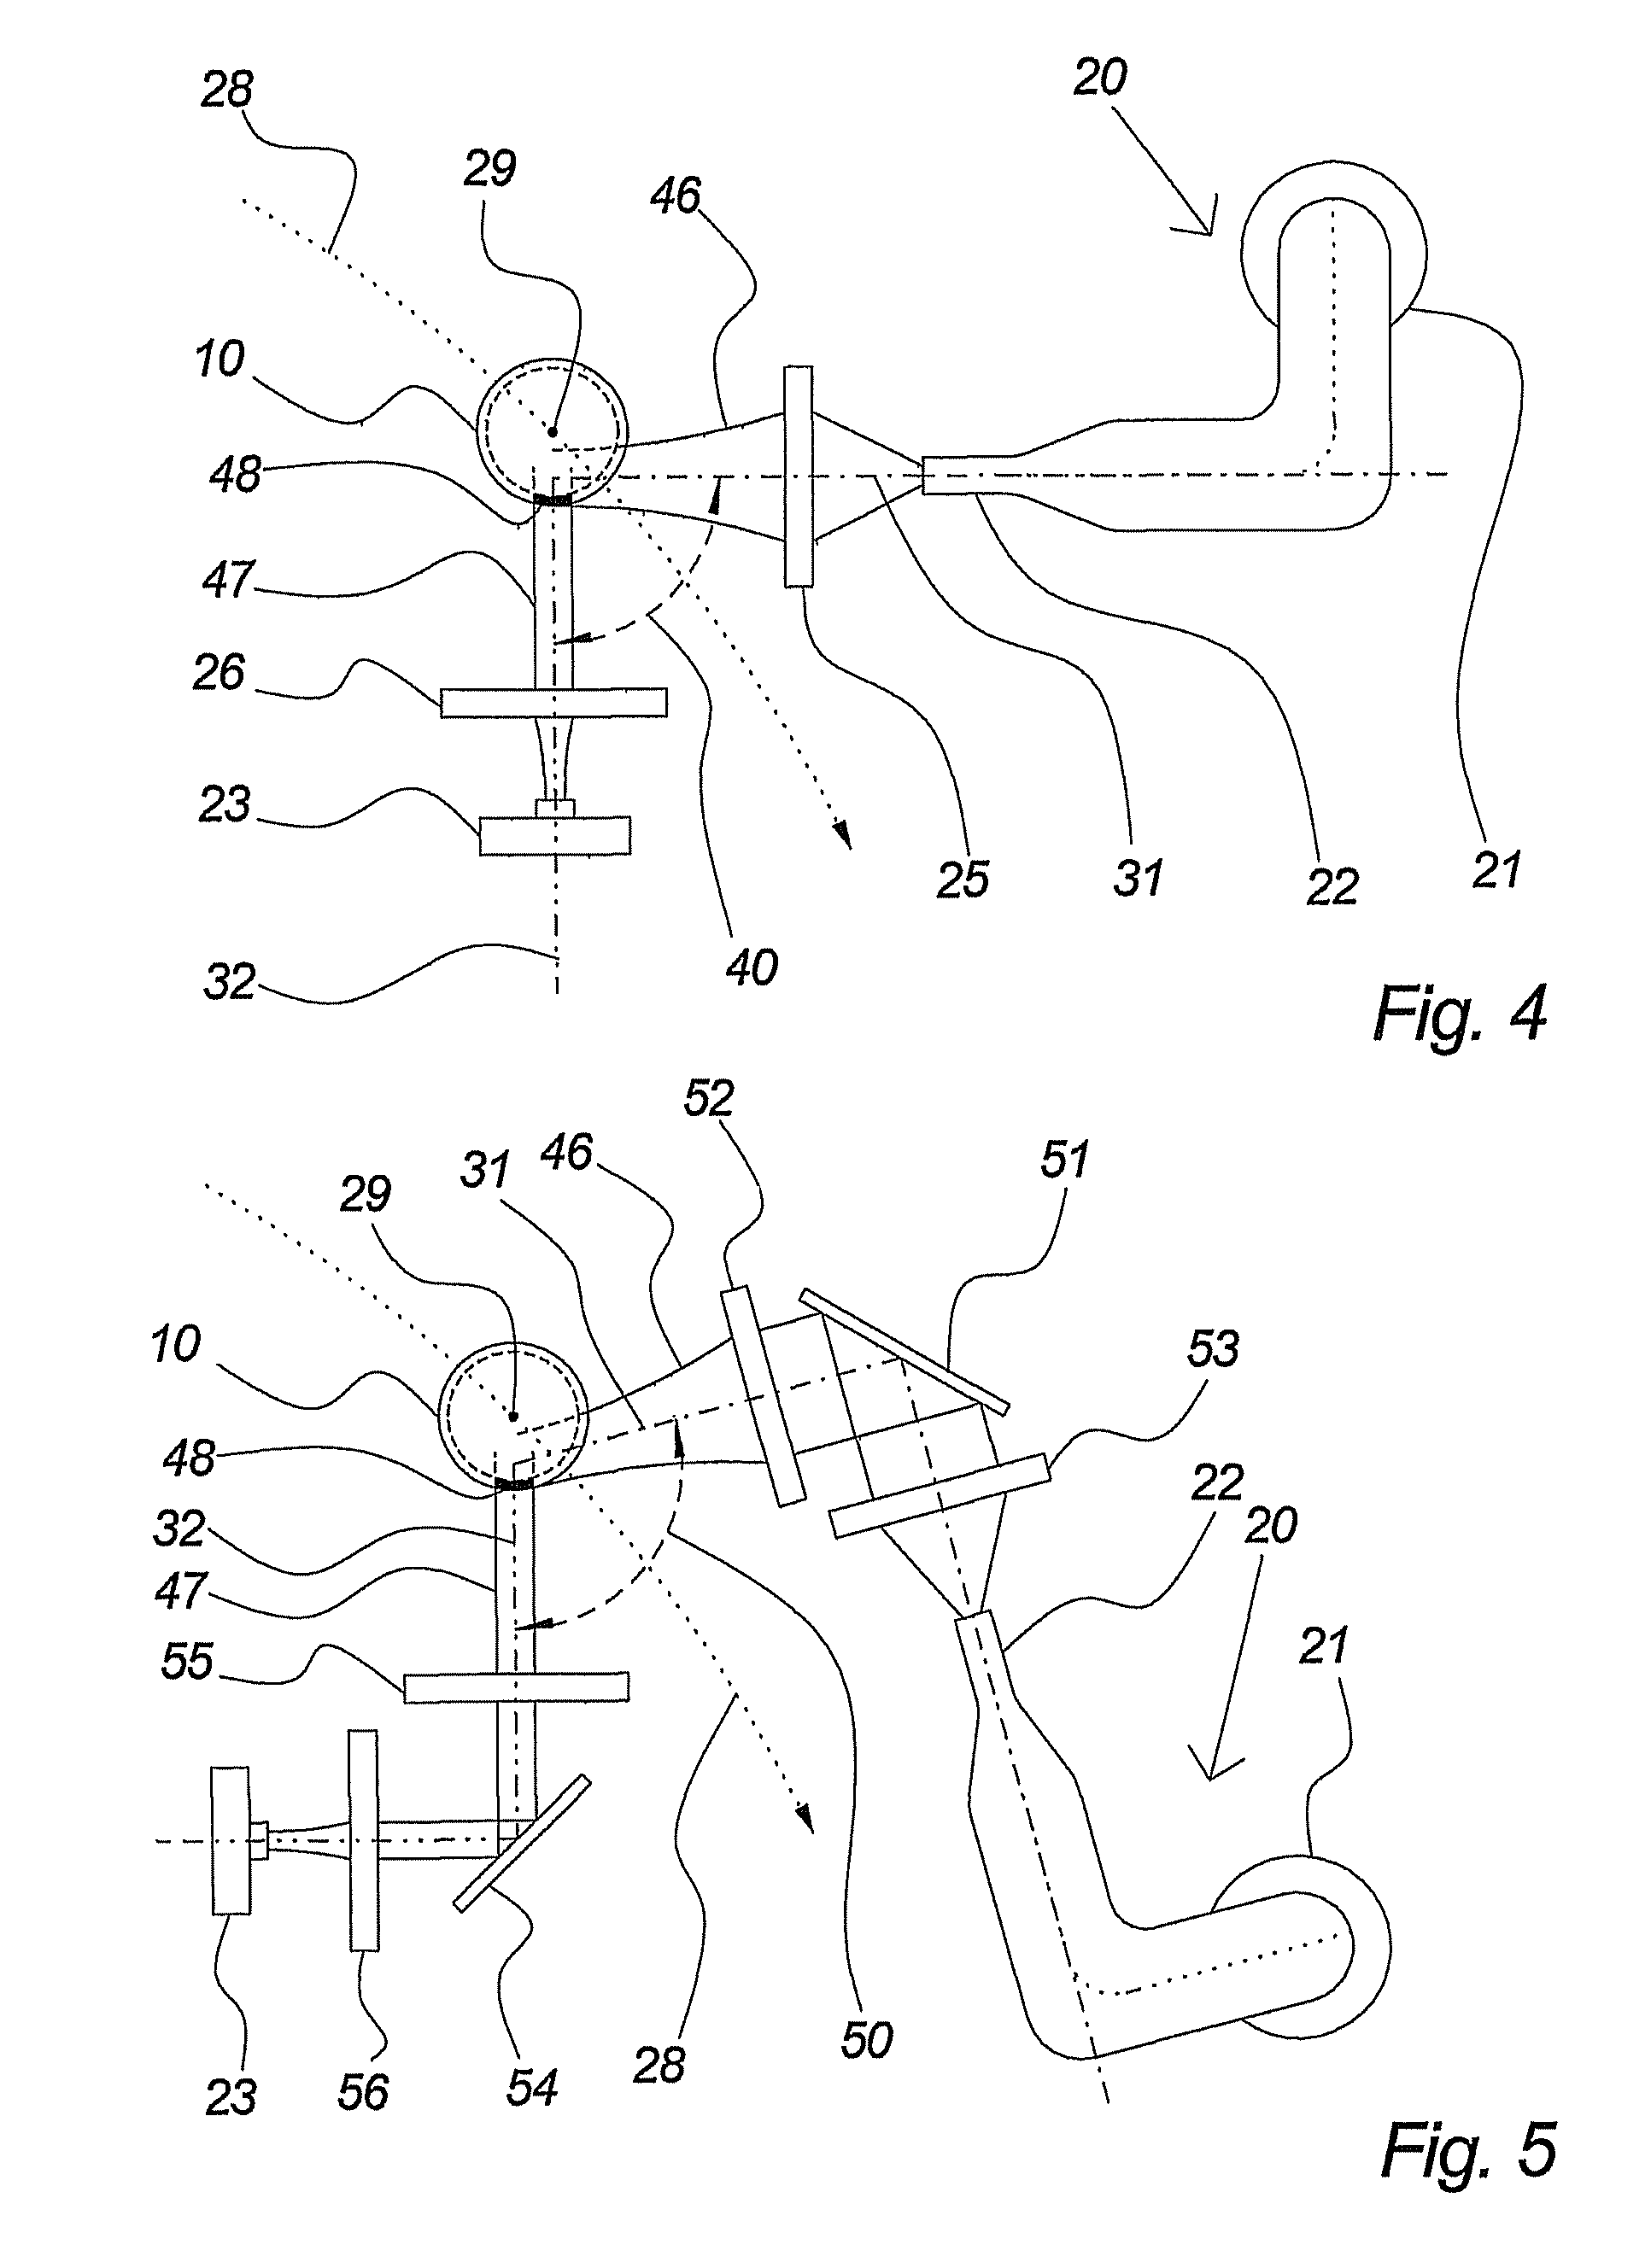 Method and system for irradiating and inspecting liquid-carrying containers